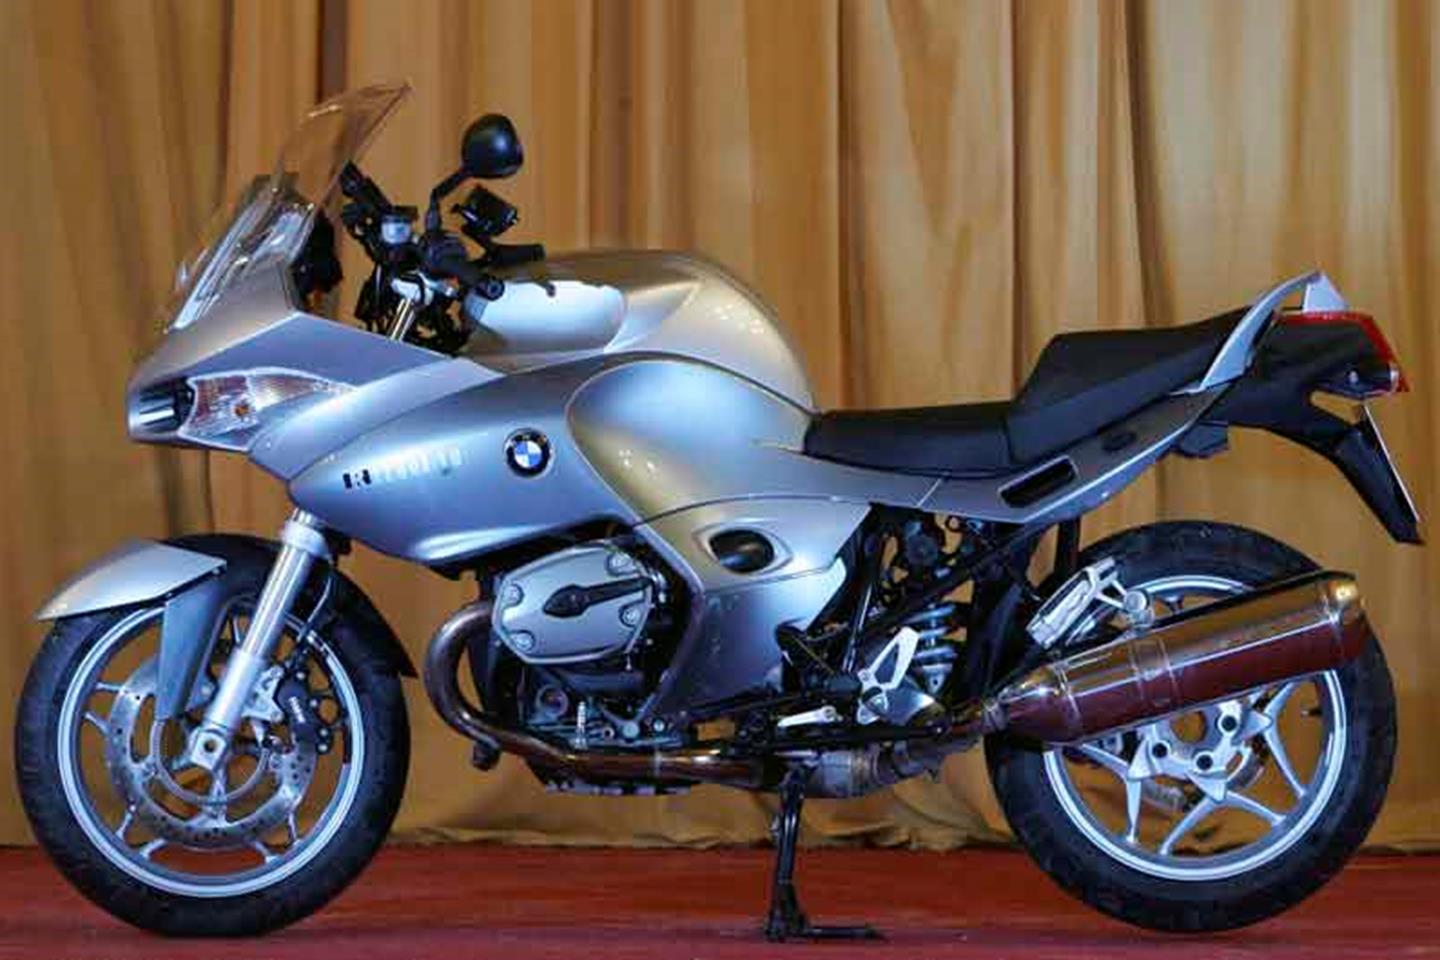 BMW R1200ST (2005-2007) Review | Speed, Specs & Prices